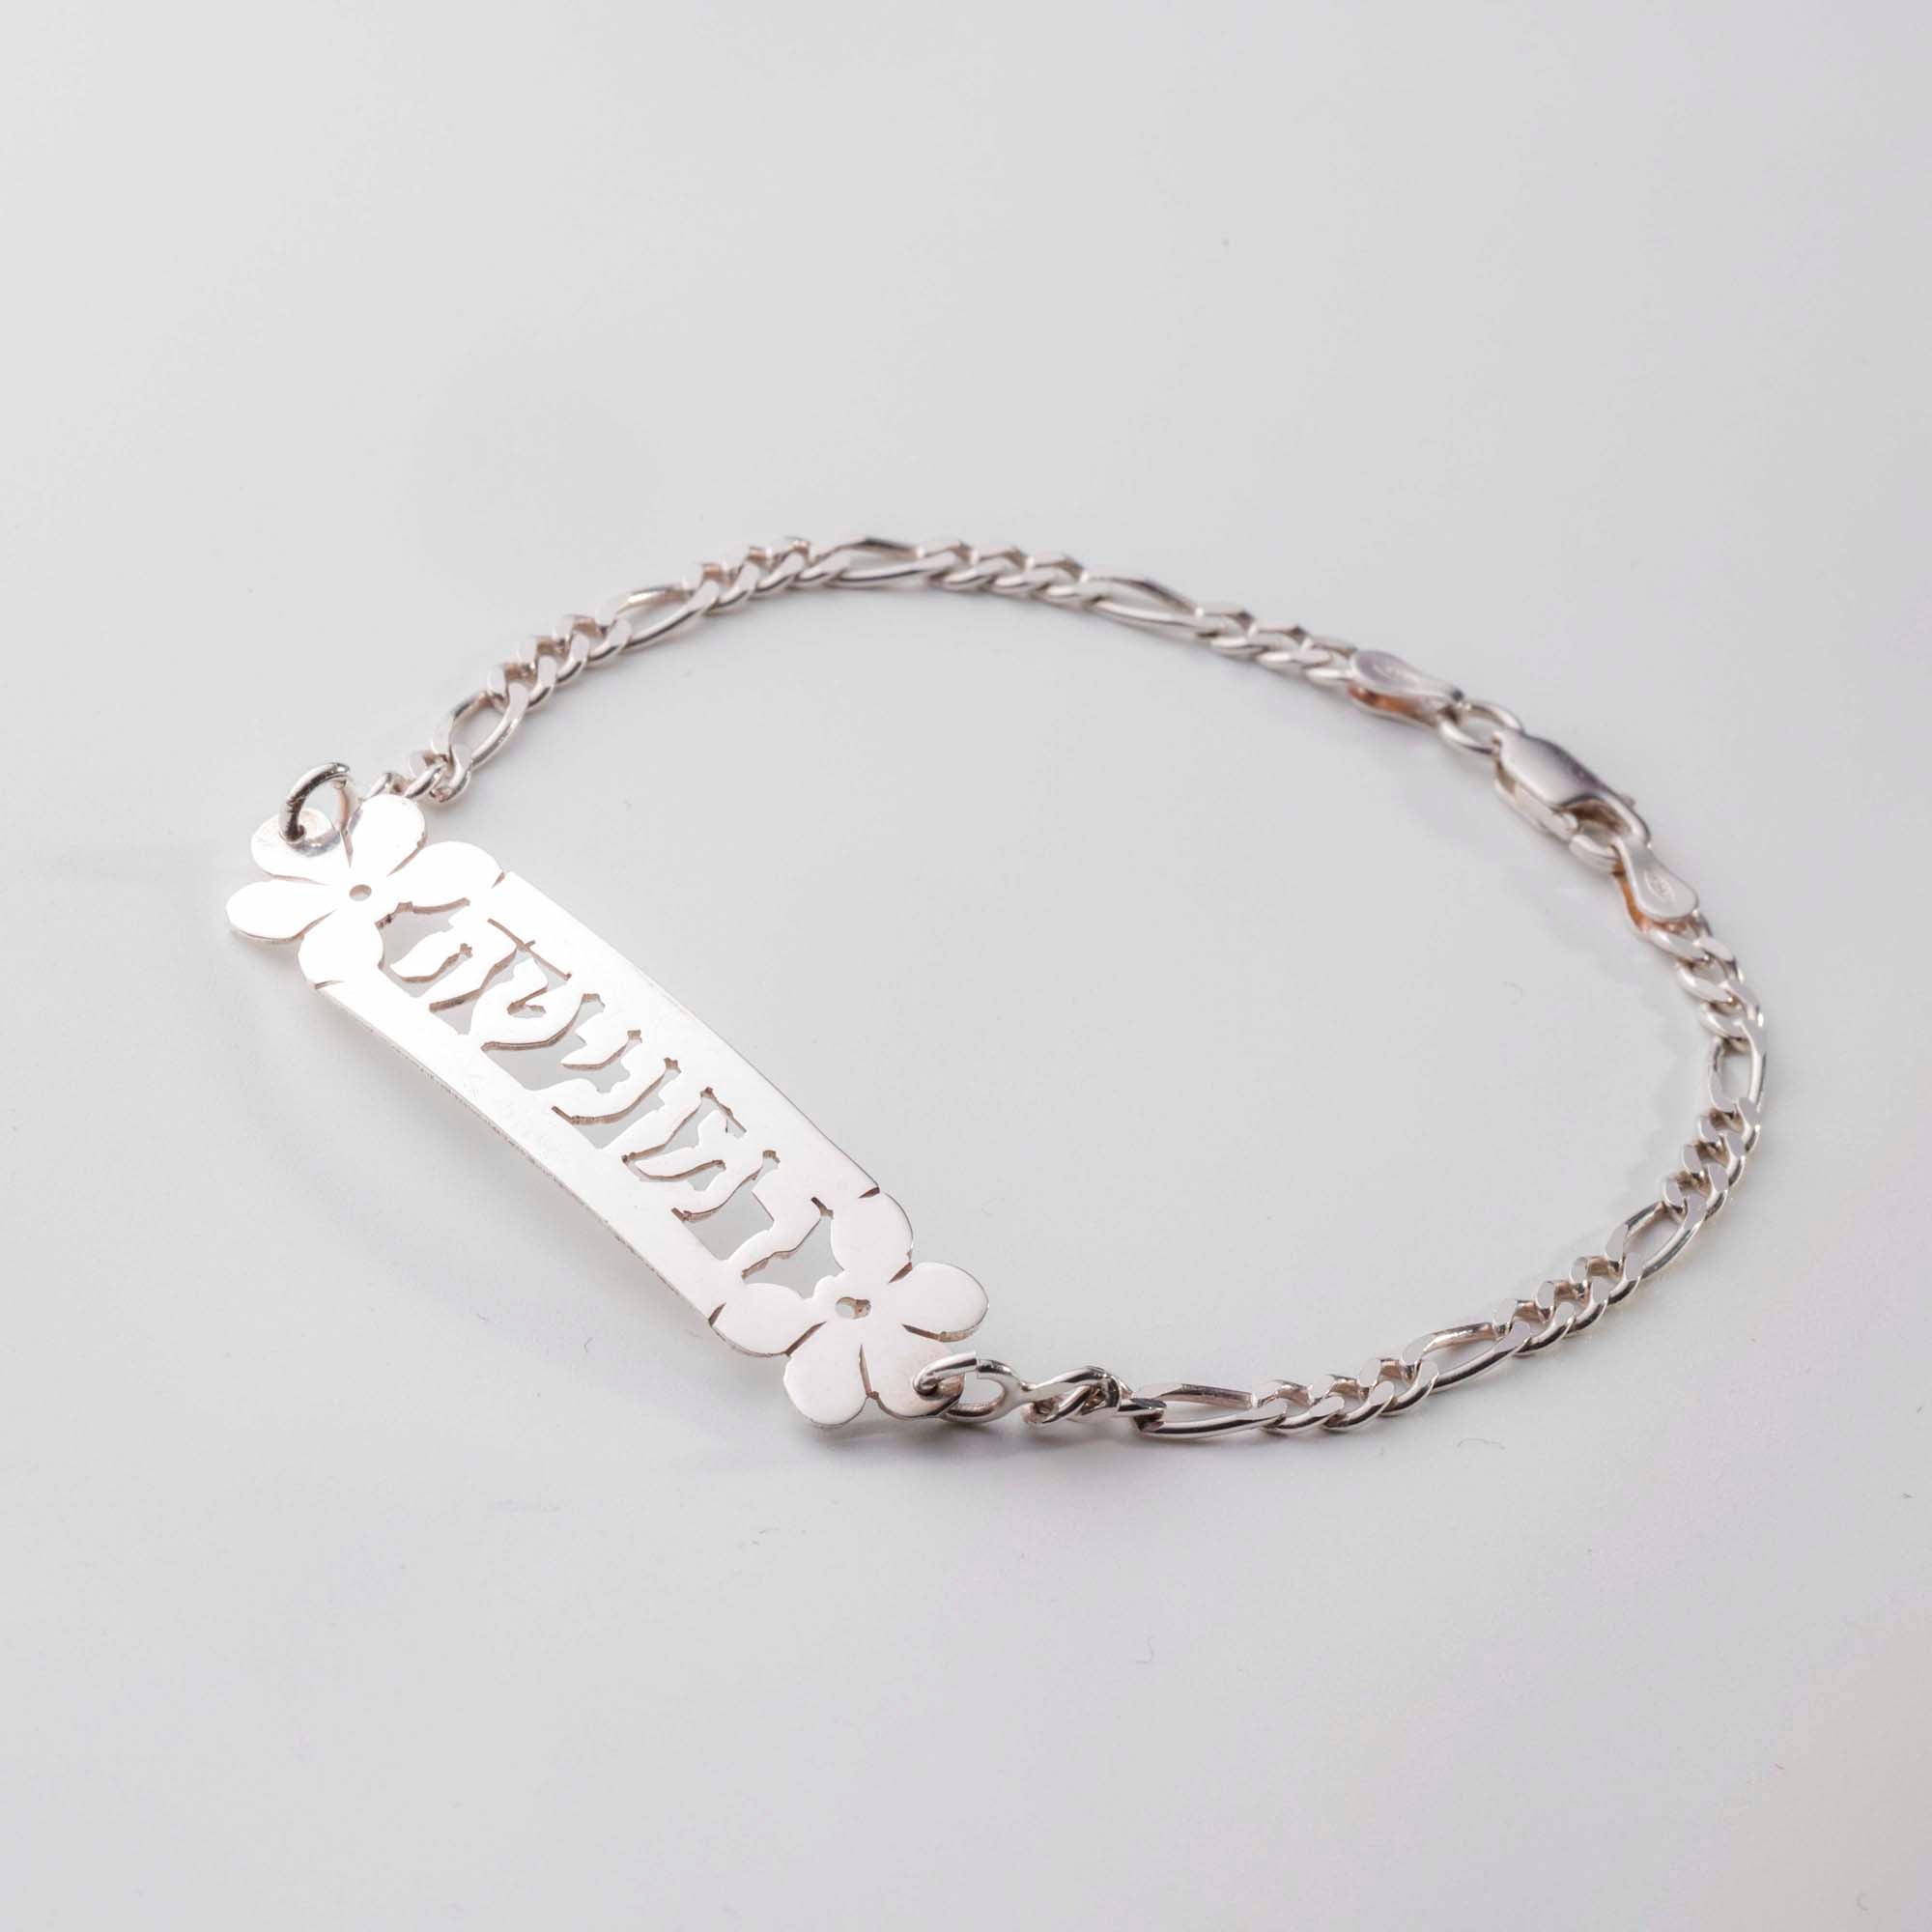 Name bracelet with a flower